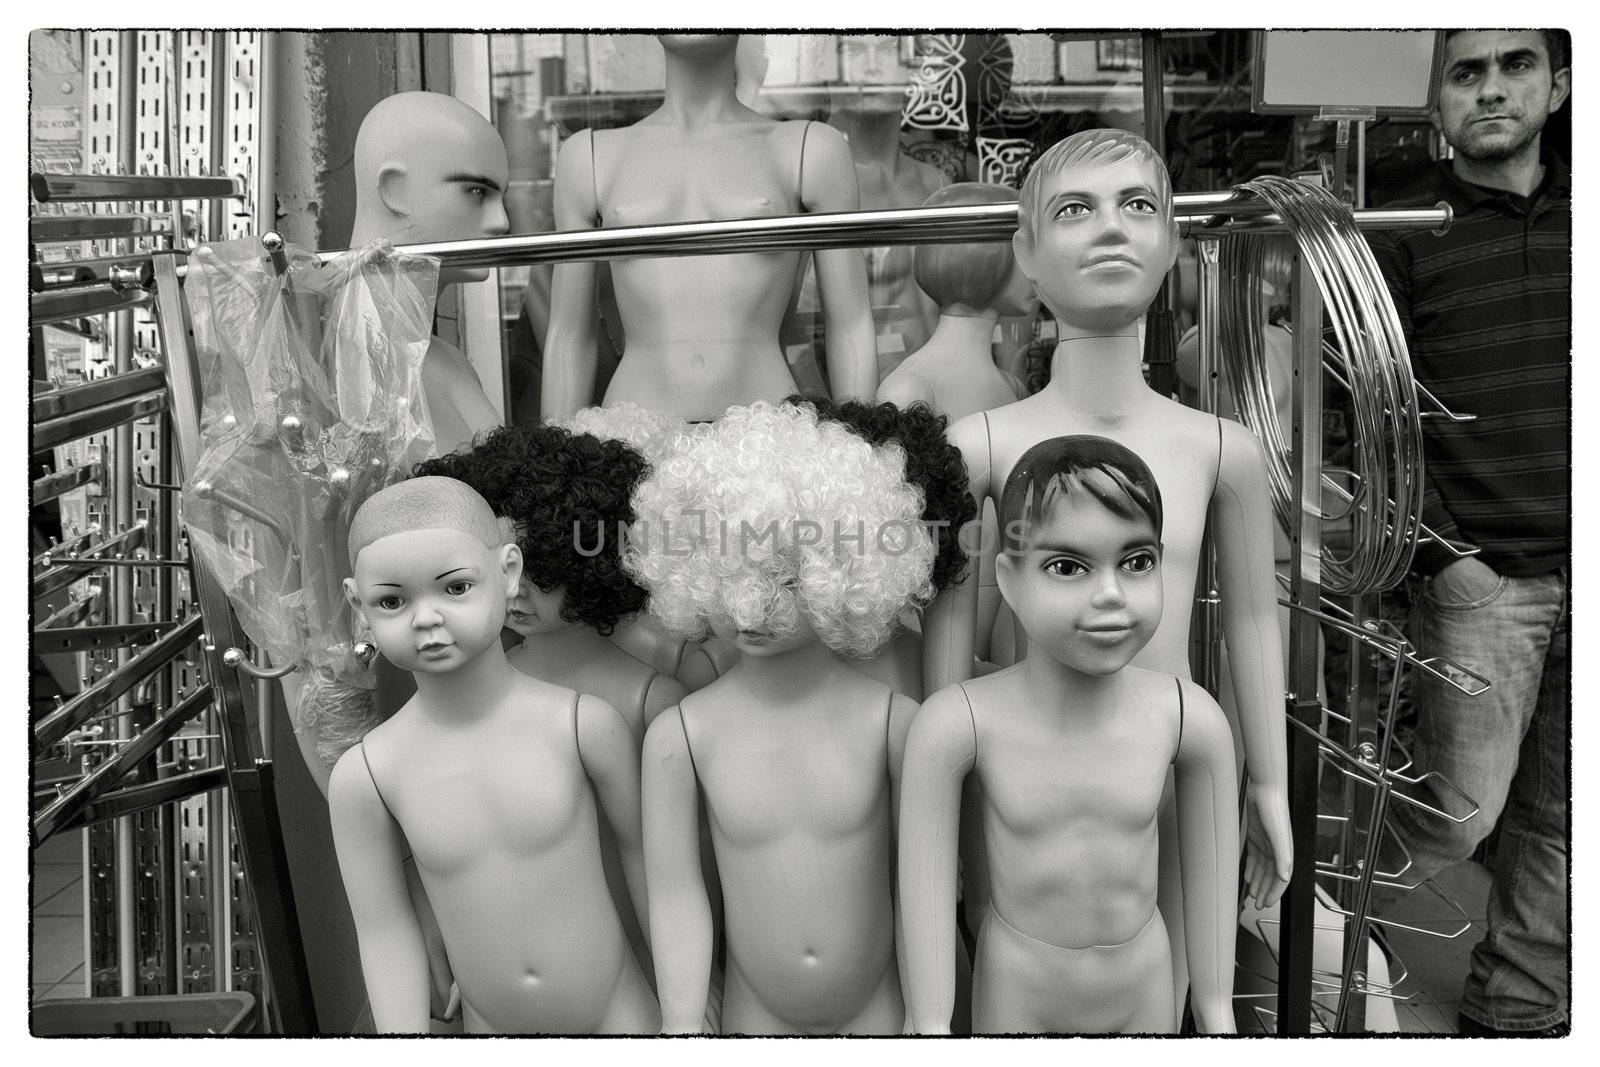 Undressed mannequins by ABCDK